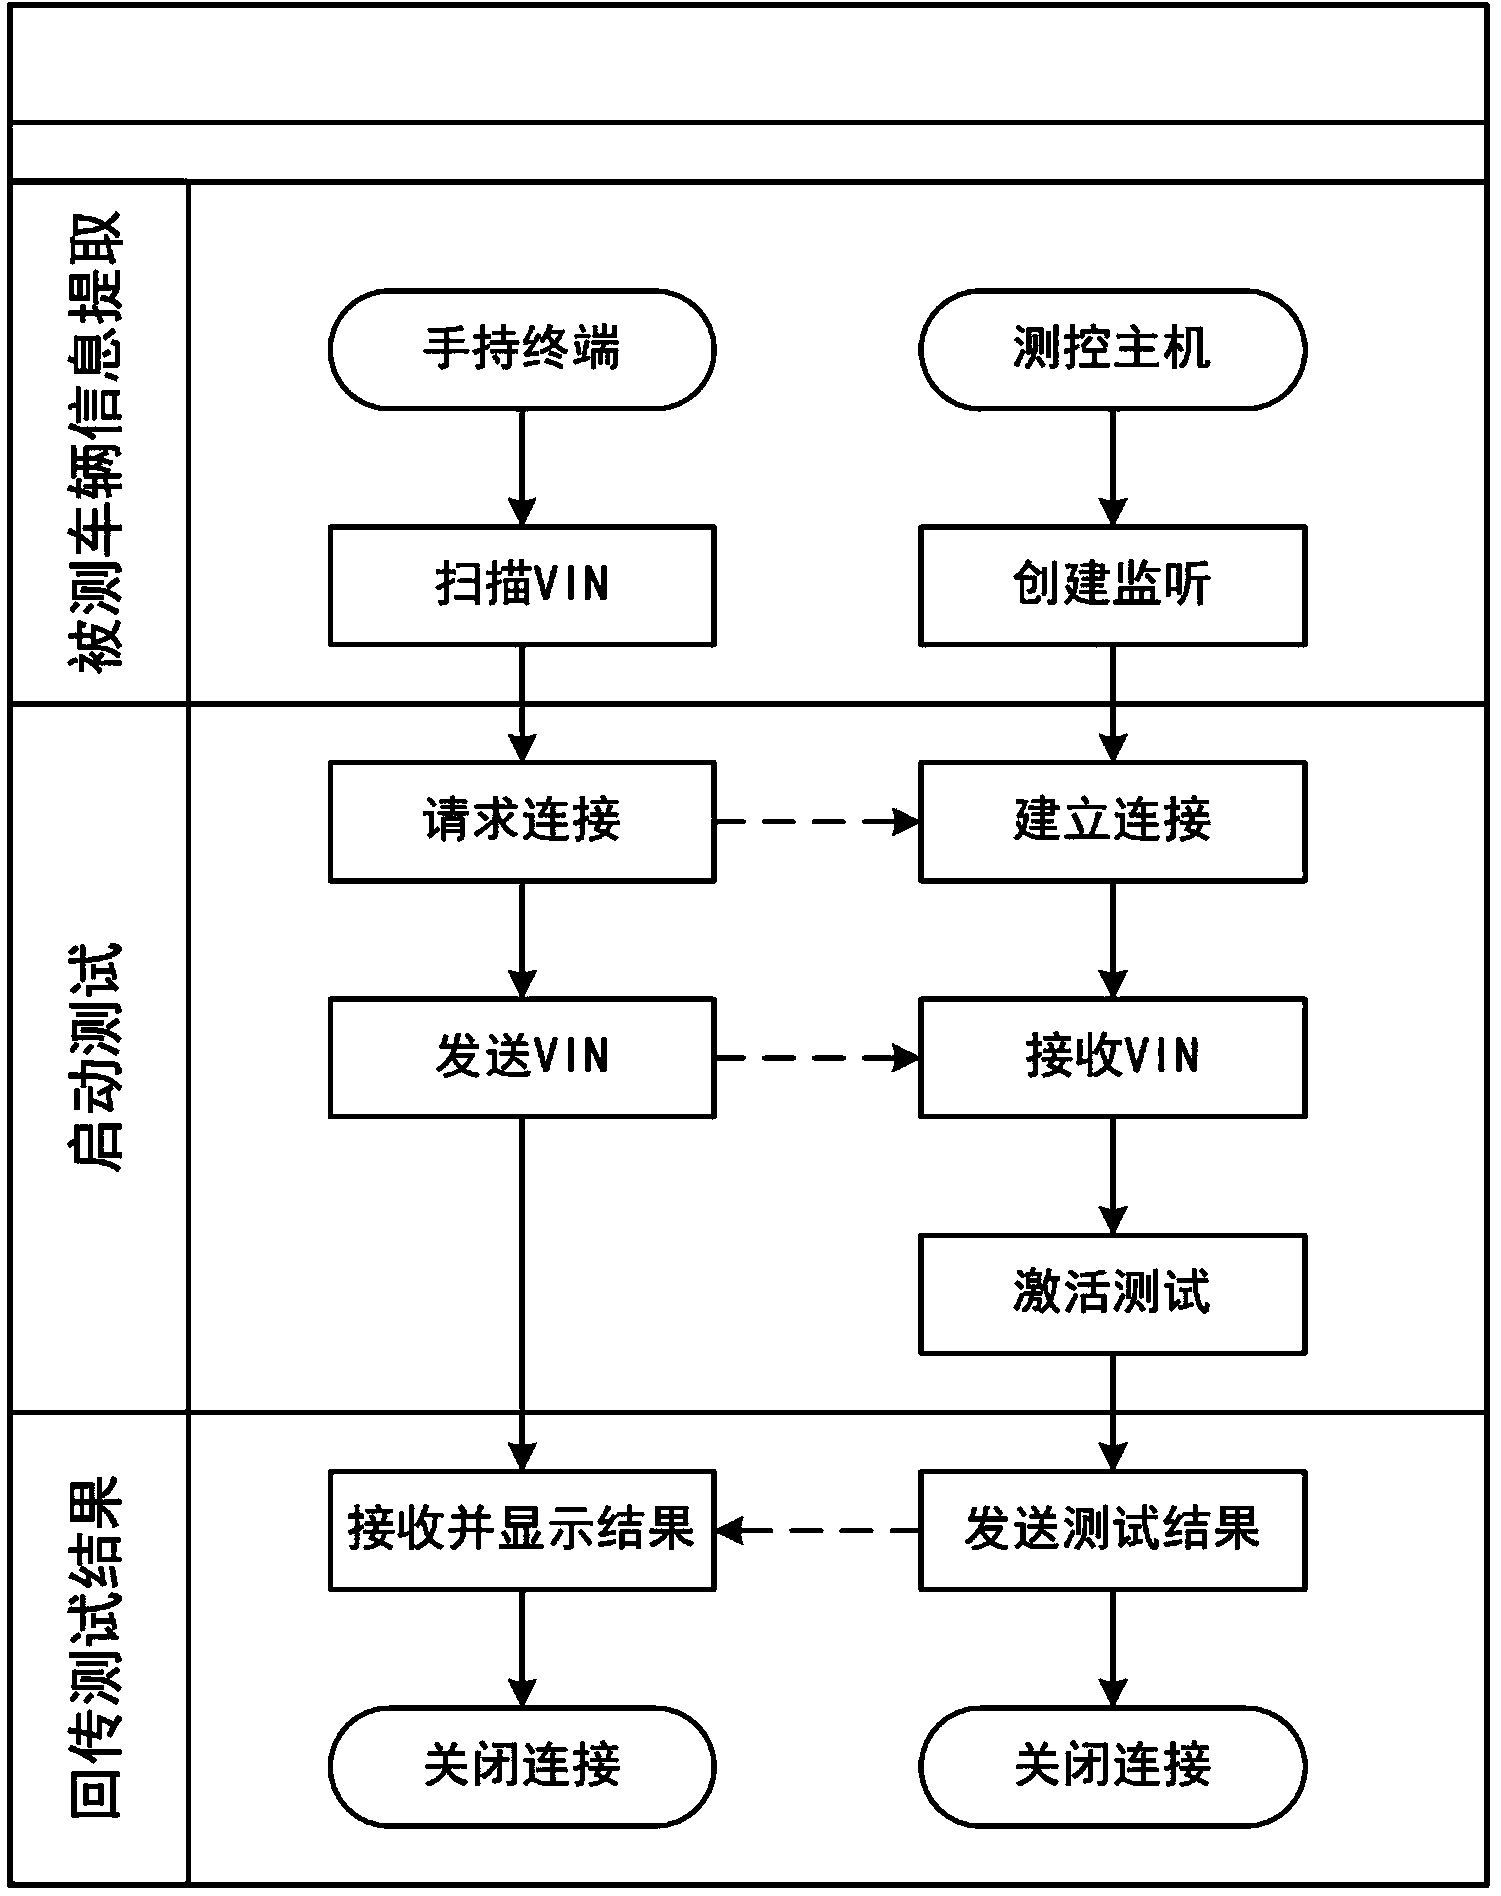 Wireless communication method for online automatic automobile deviation test system